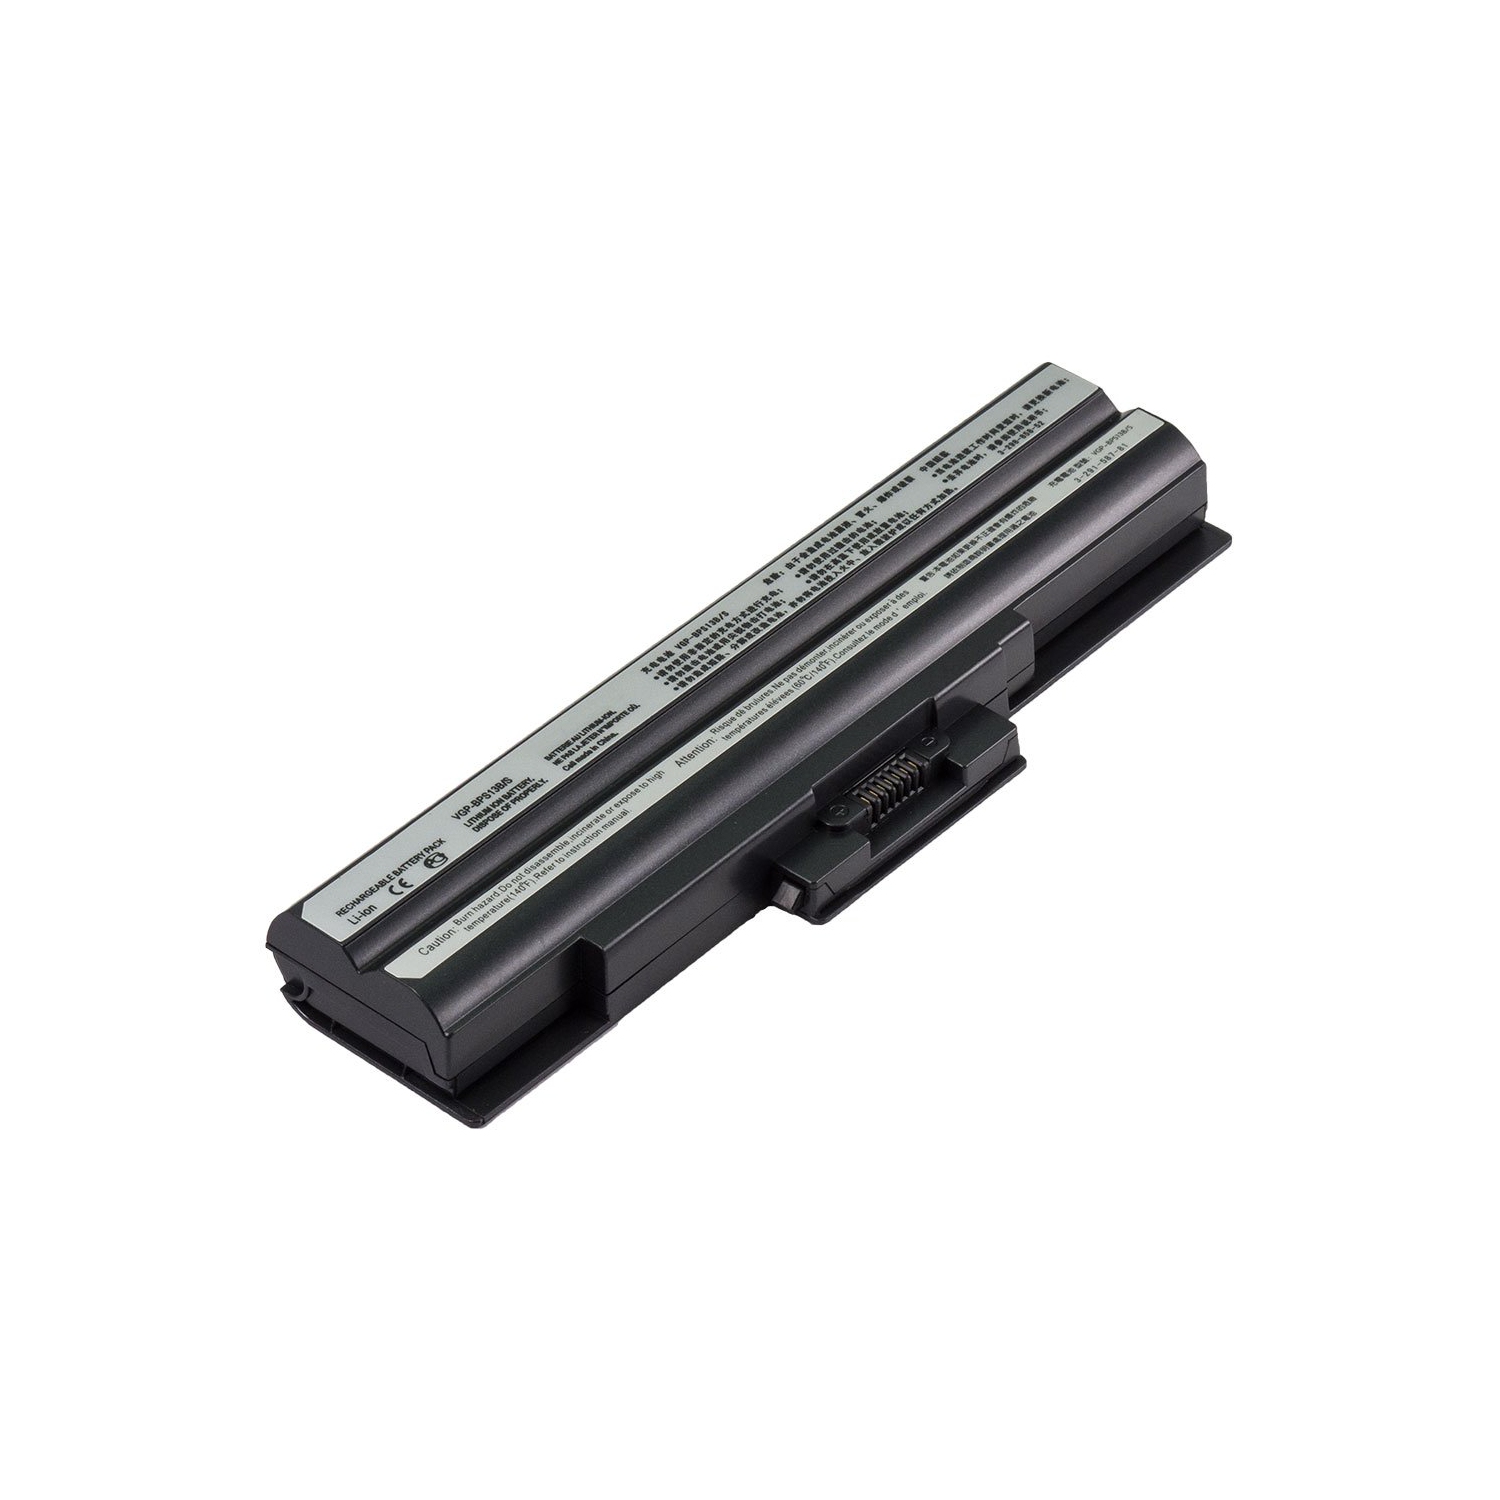 Laptop Battery Replacement for Sony VAIO VGN-FW270J/B, VGP-BPL13, VGP-BPS13/Q, VGP-BPS13A/B, VGP-BPS13A/S, VGP-BPS13A